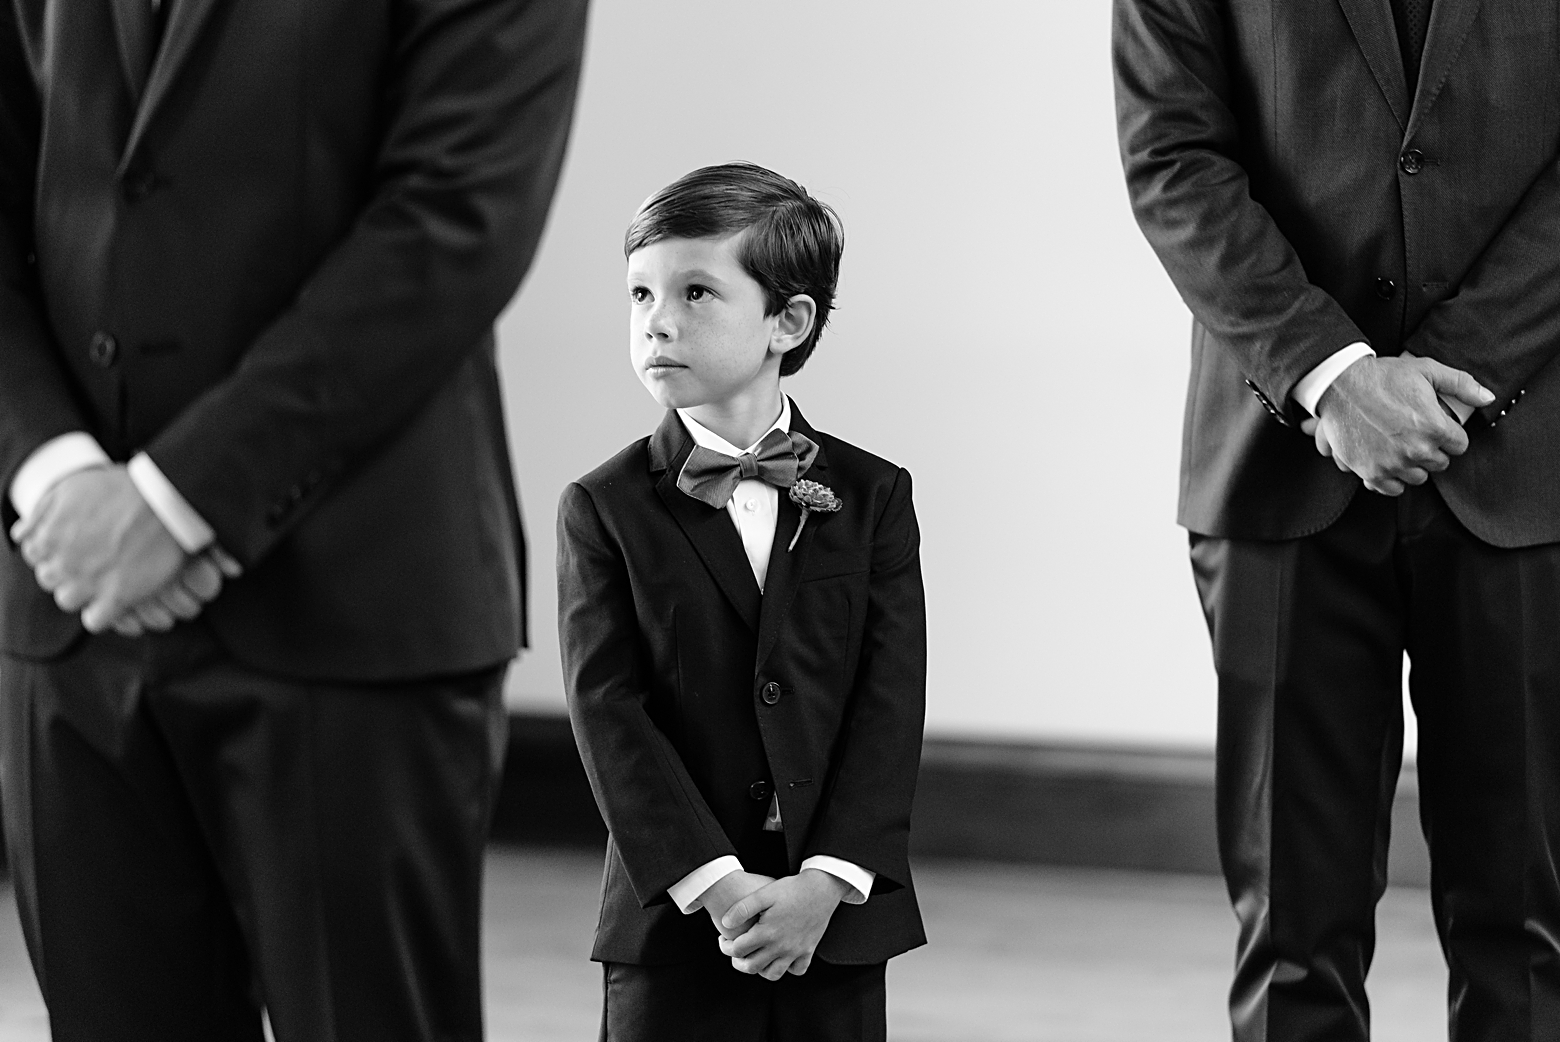 Groom's son looks at his Dad and future mom during their wedding ceremony